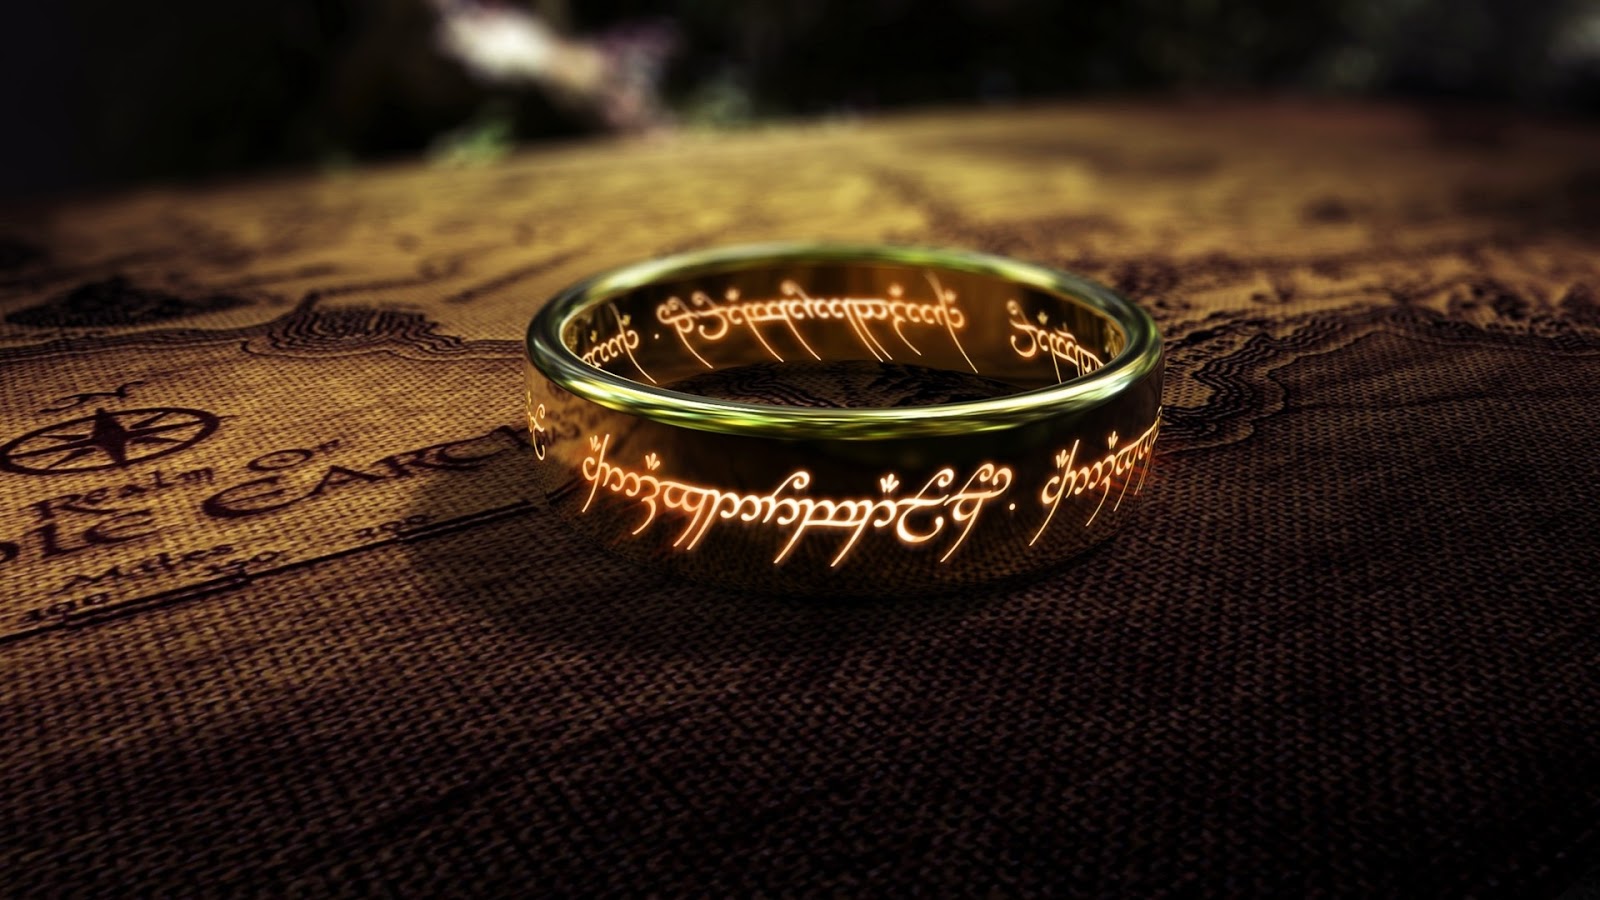 The Lord Of Rings Wallpaper Covers Heat